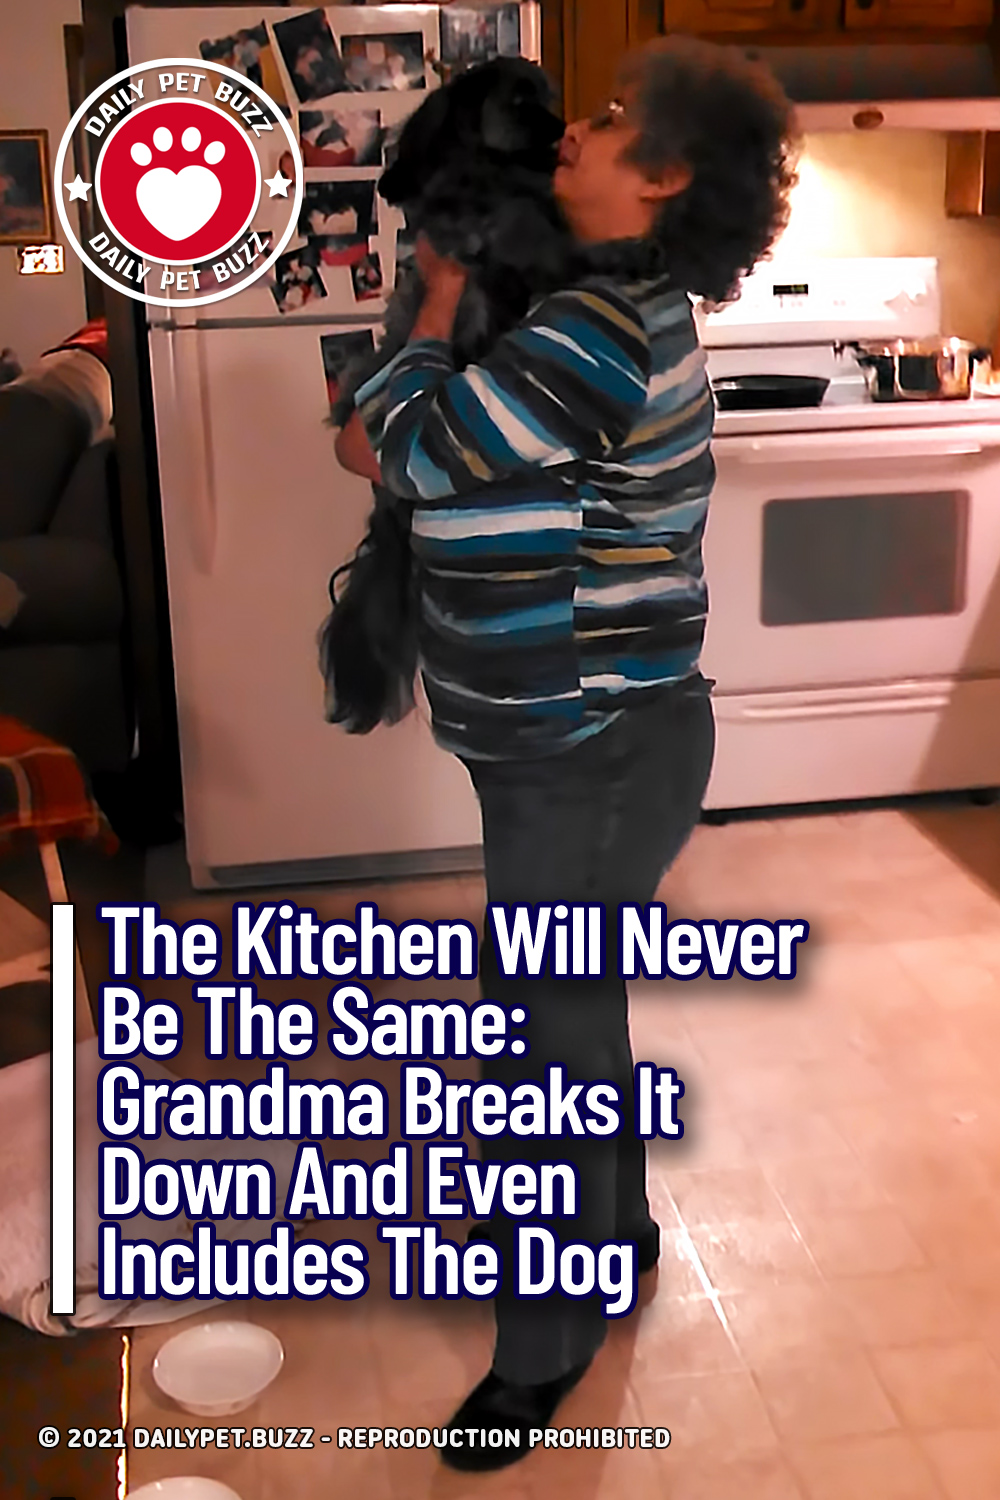 The Kitchen Will Never Be The Same: Grandma Breaks It Down And Even Includes The Dog